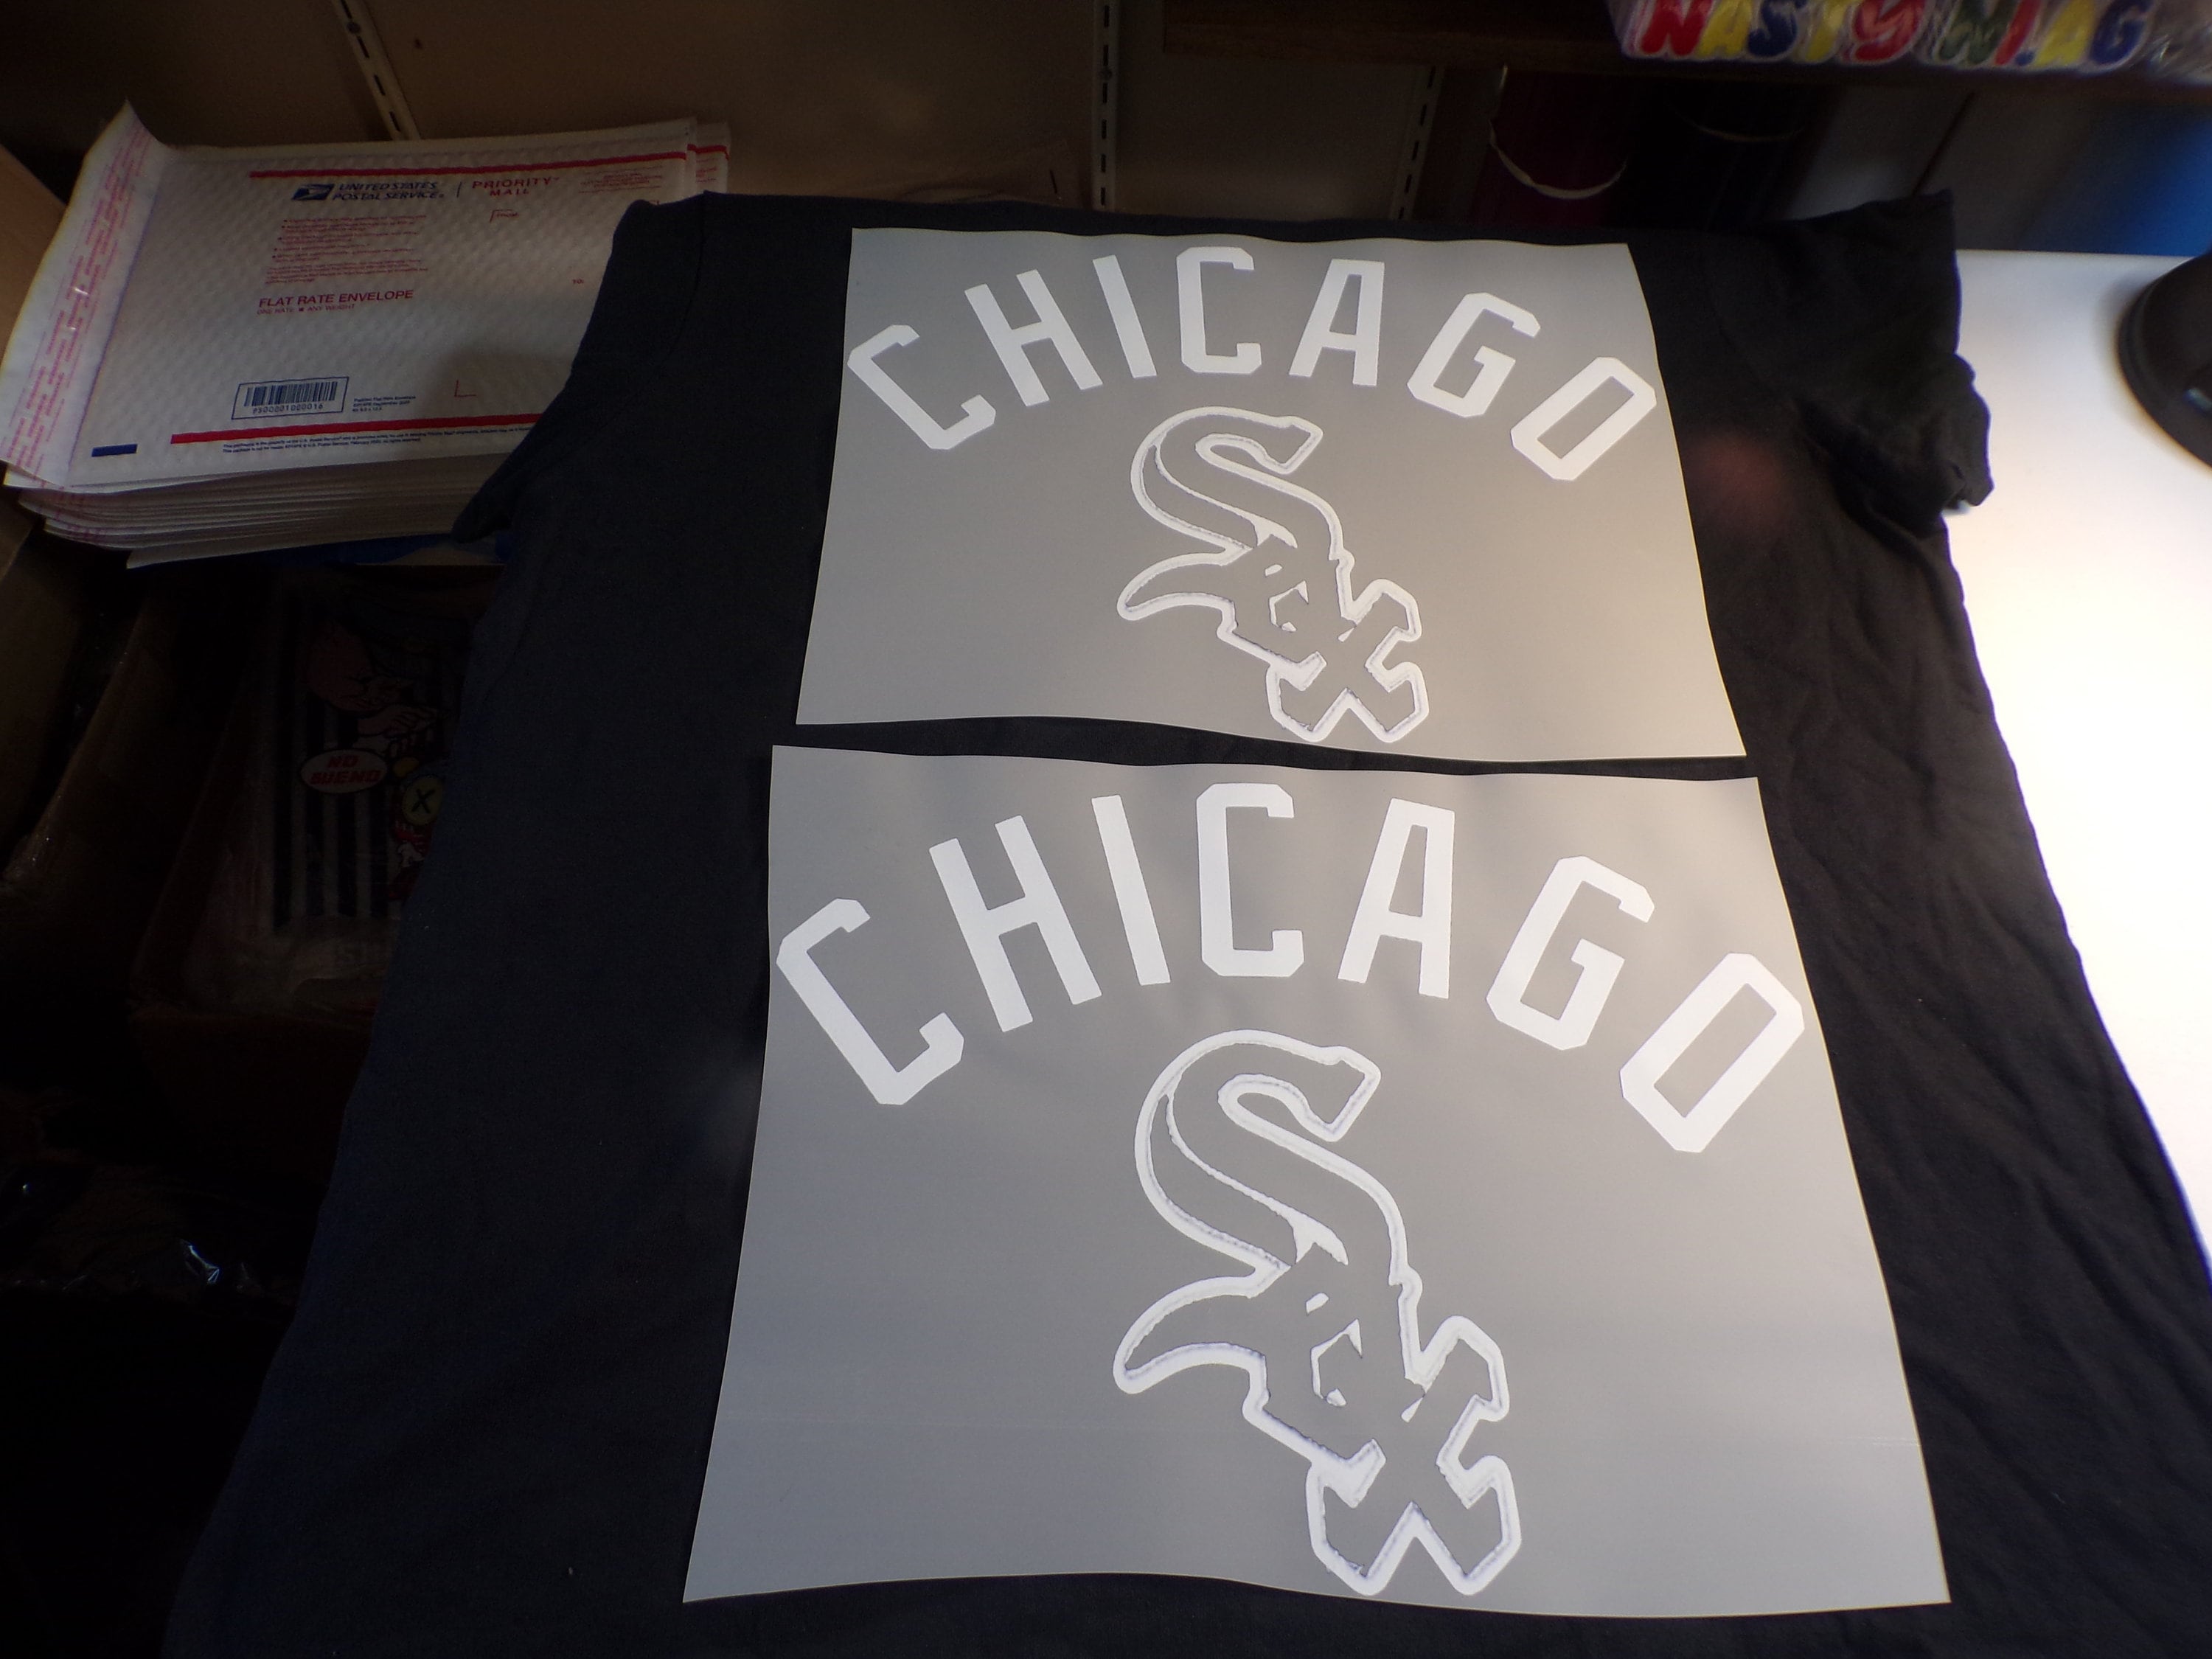 Vintage Sixties Chicago White Sox Art T-Shirt